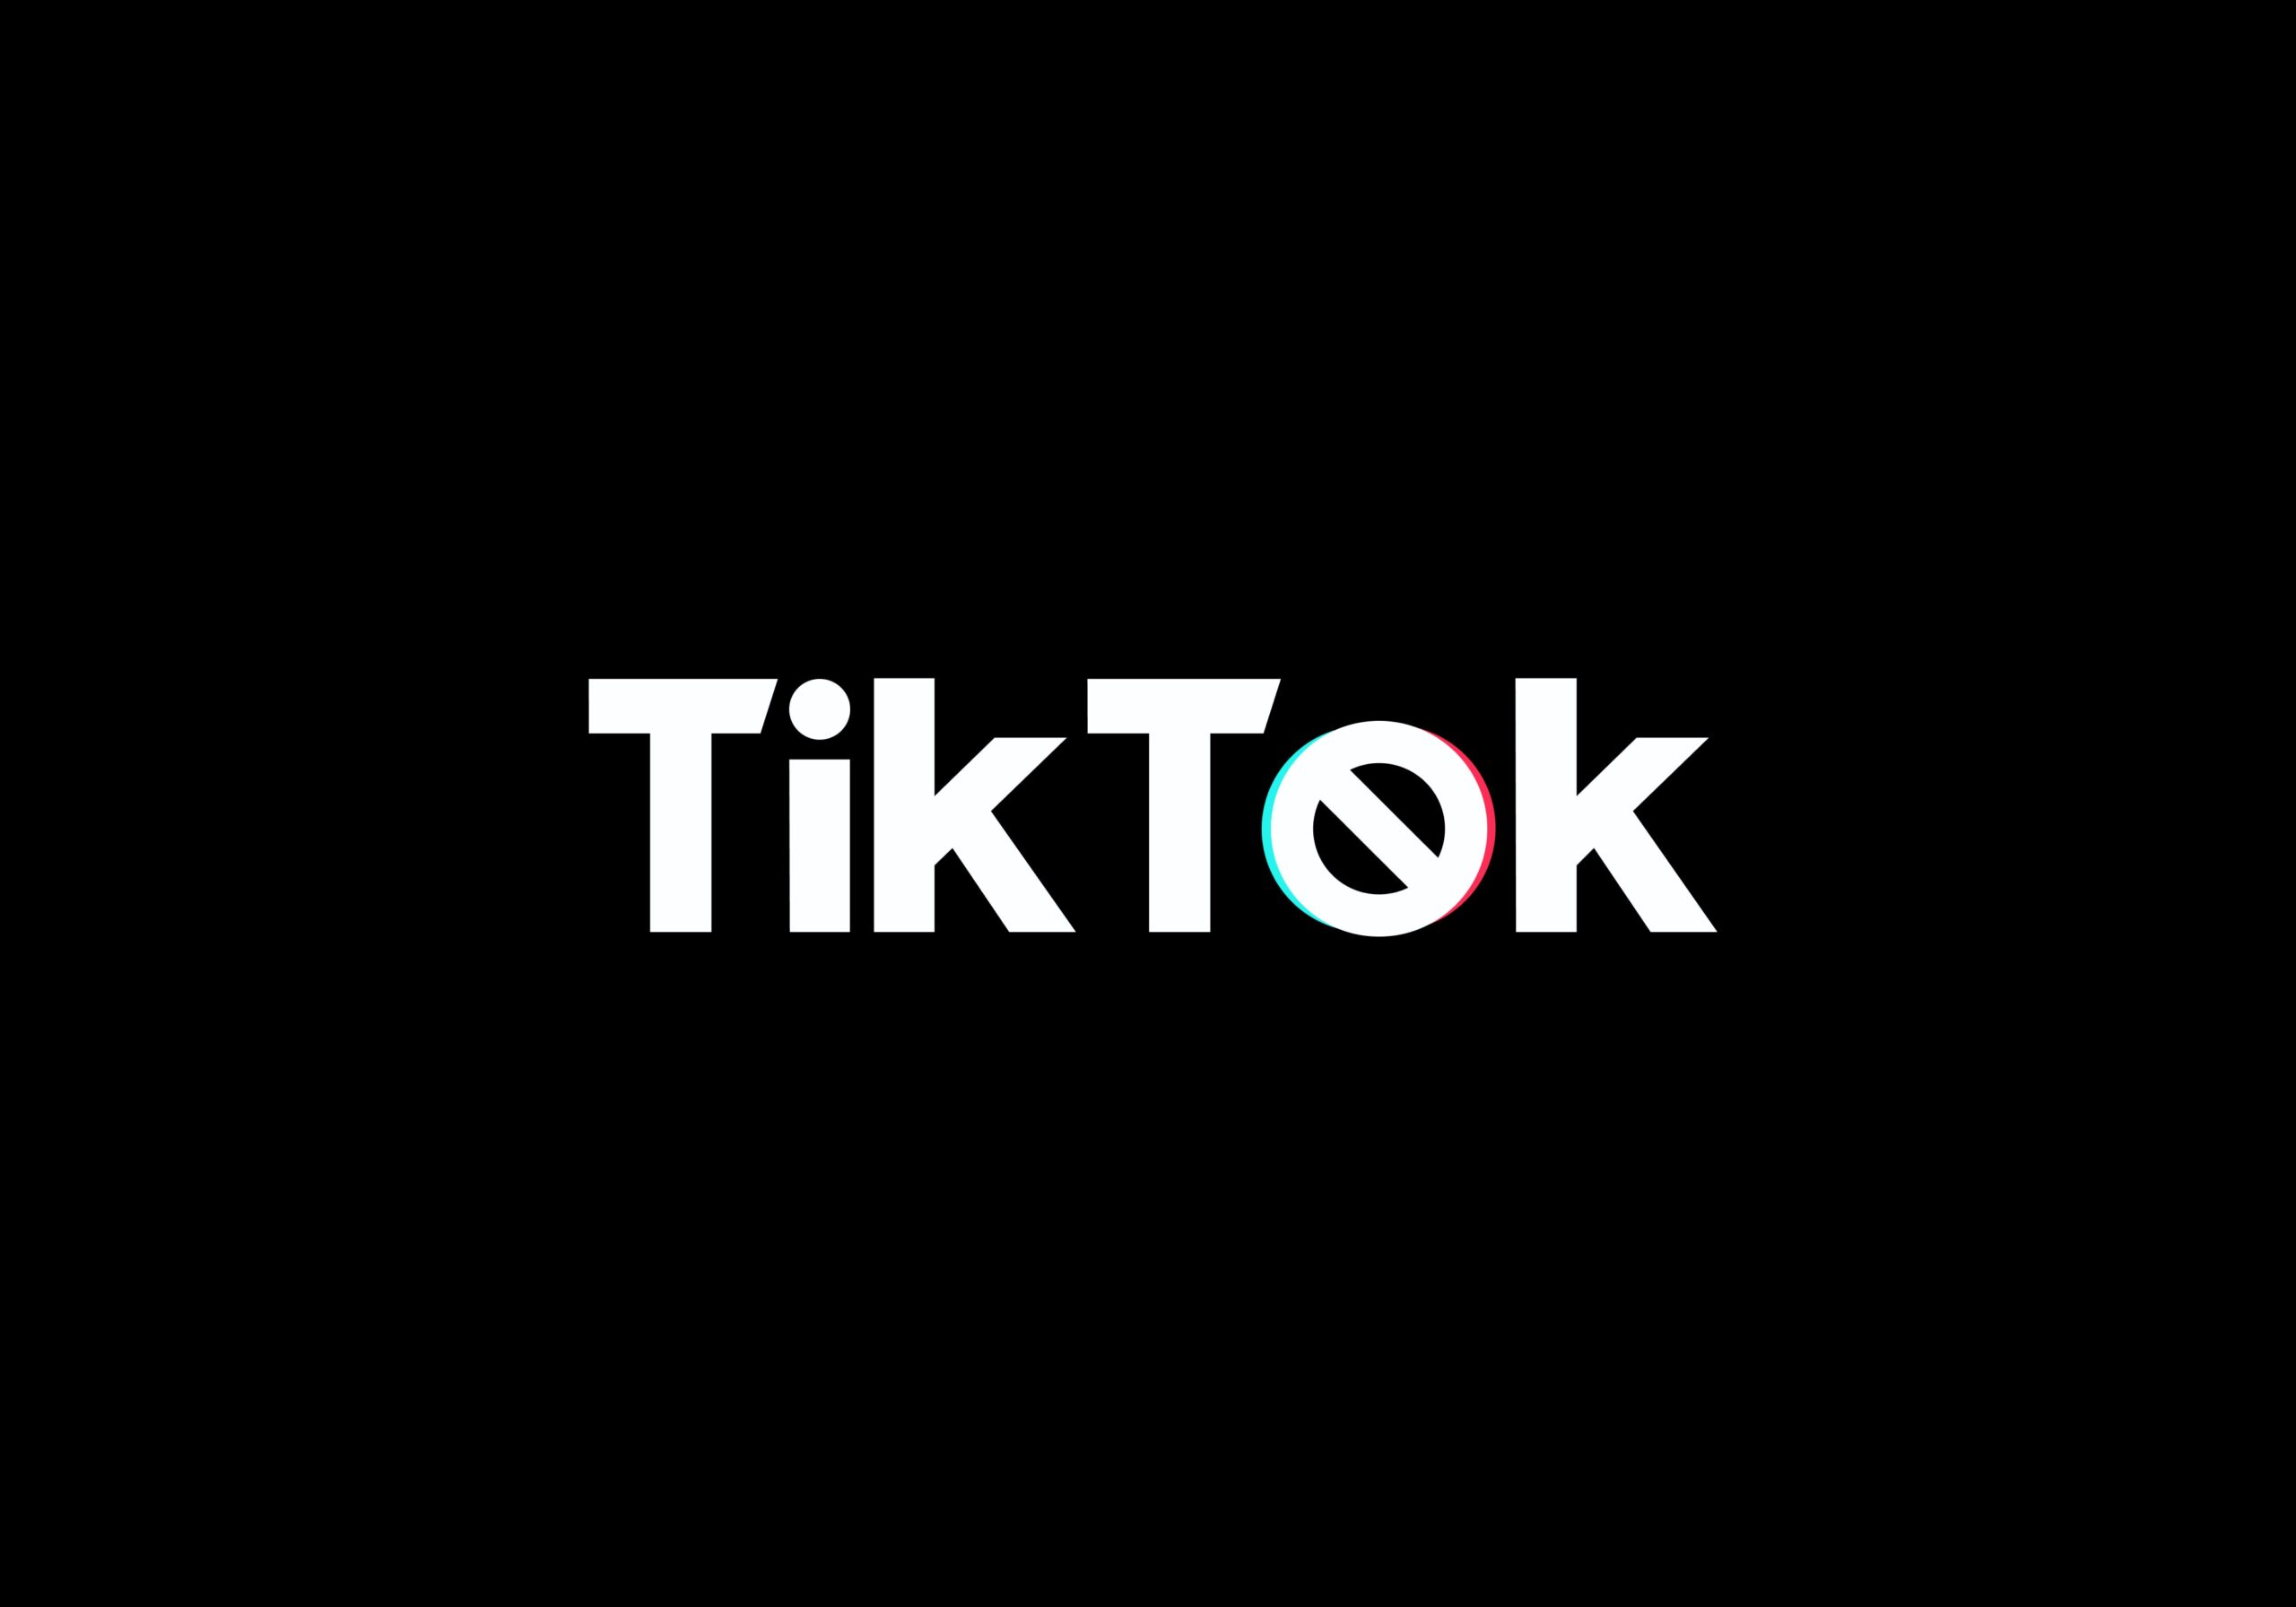 Whats The Impact Of The TikTok Algorithm On Content Reach?